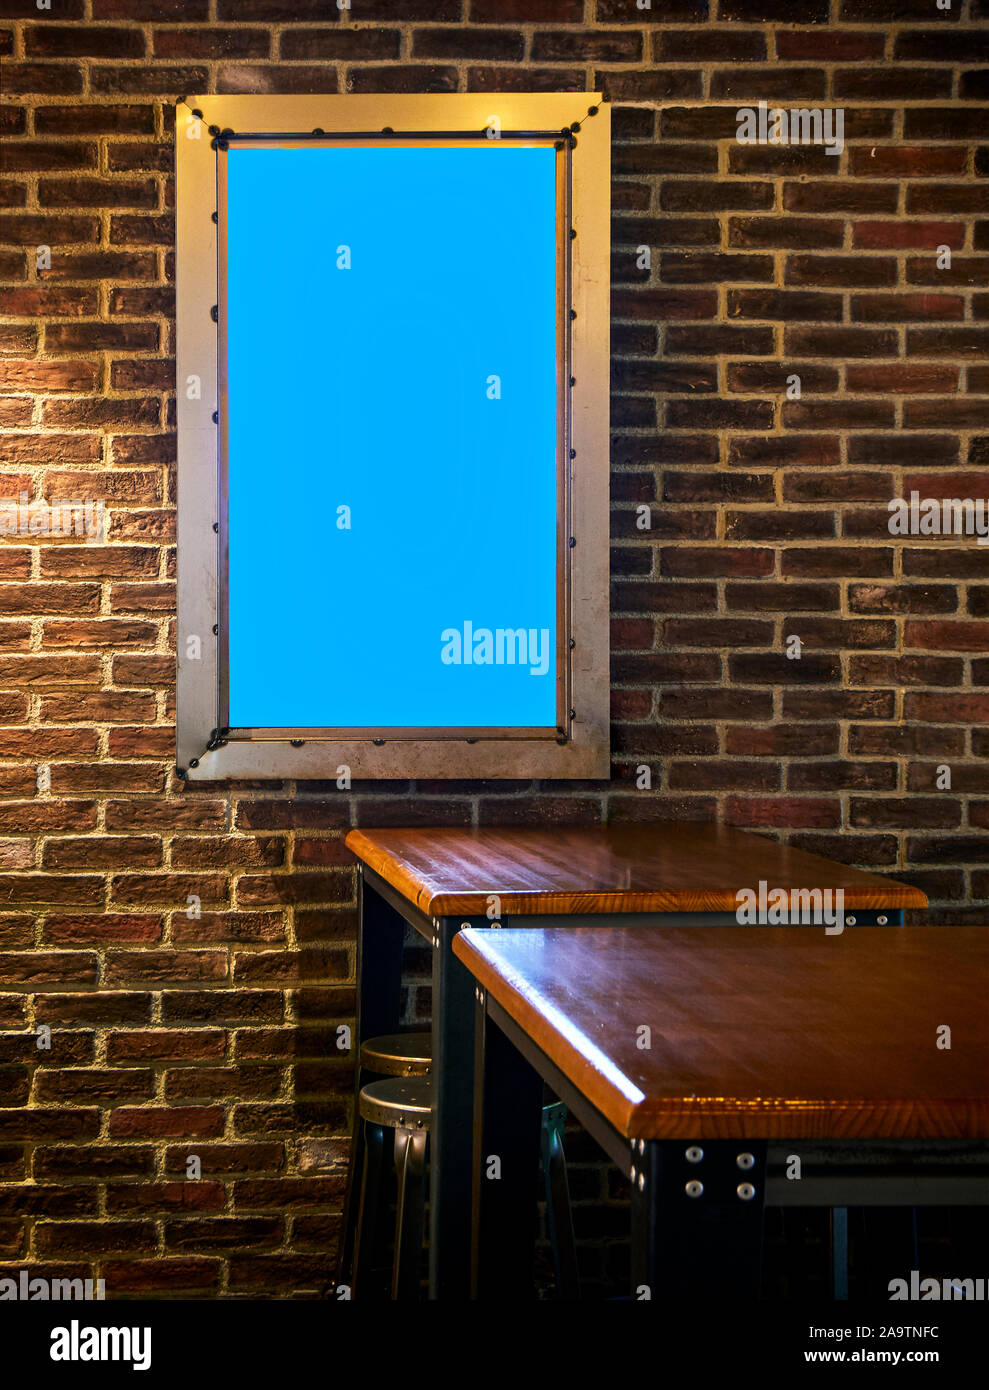 Dining room of an Industrial style Restaurant with a Blank Display on a Brick Wall. Stock Photo